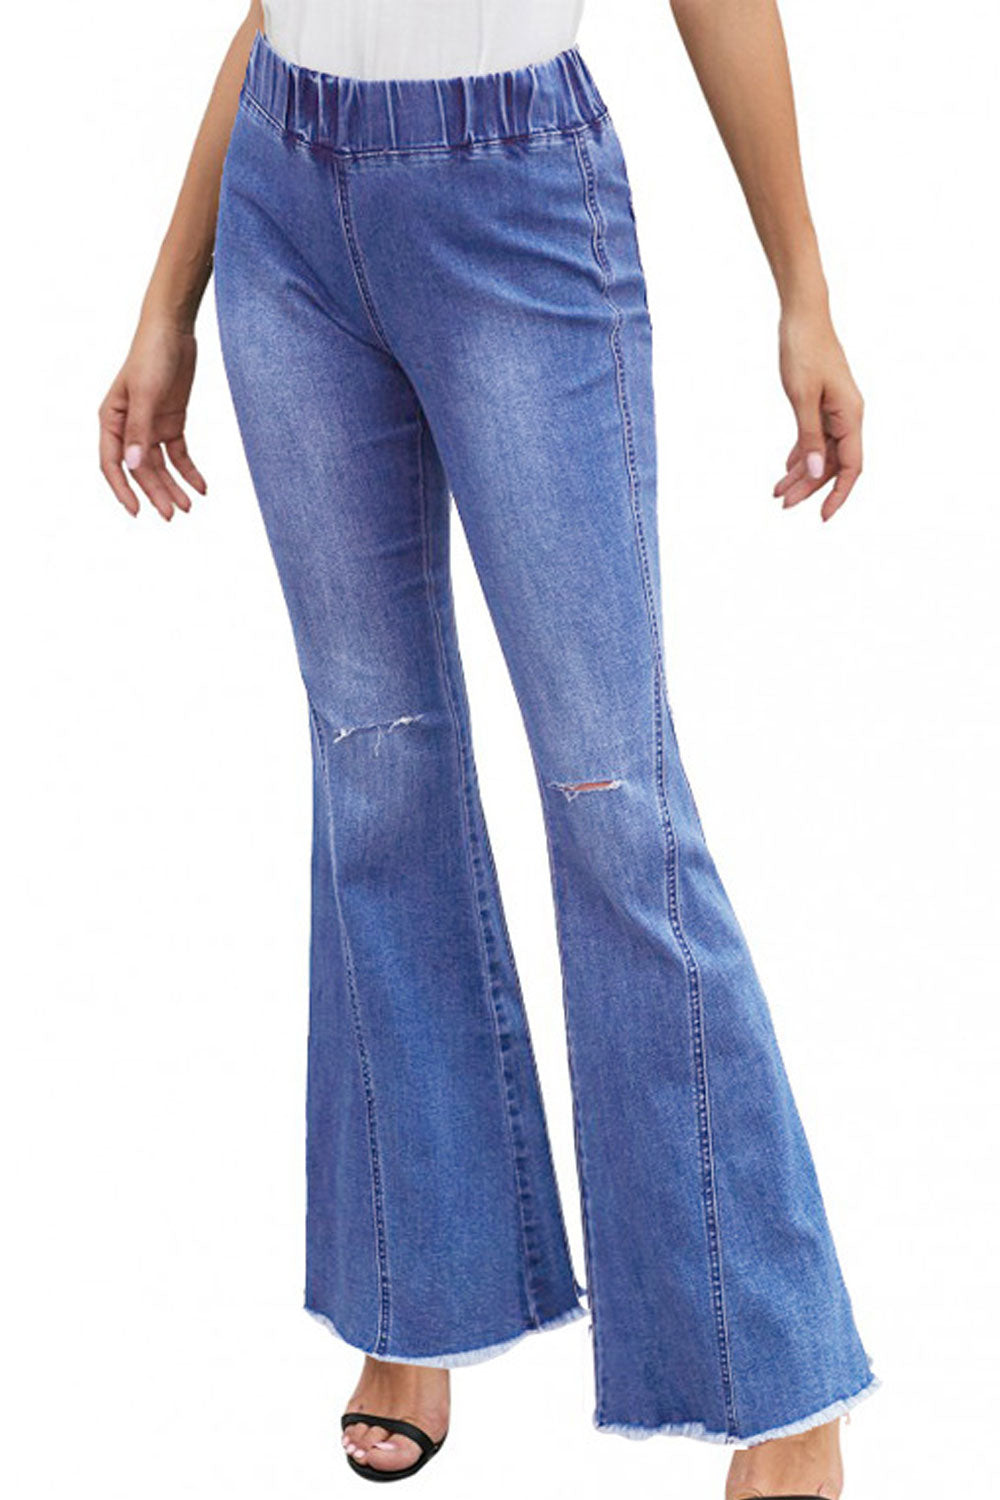 Women Loose End Fit Casual Jeans - WJN73912